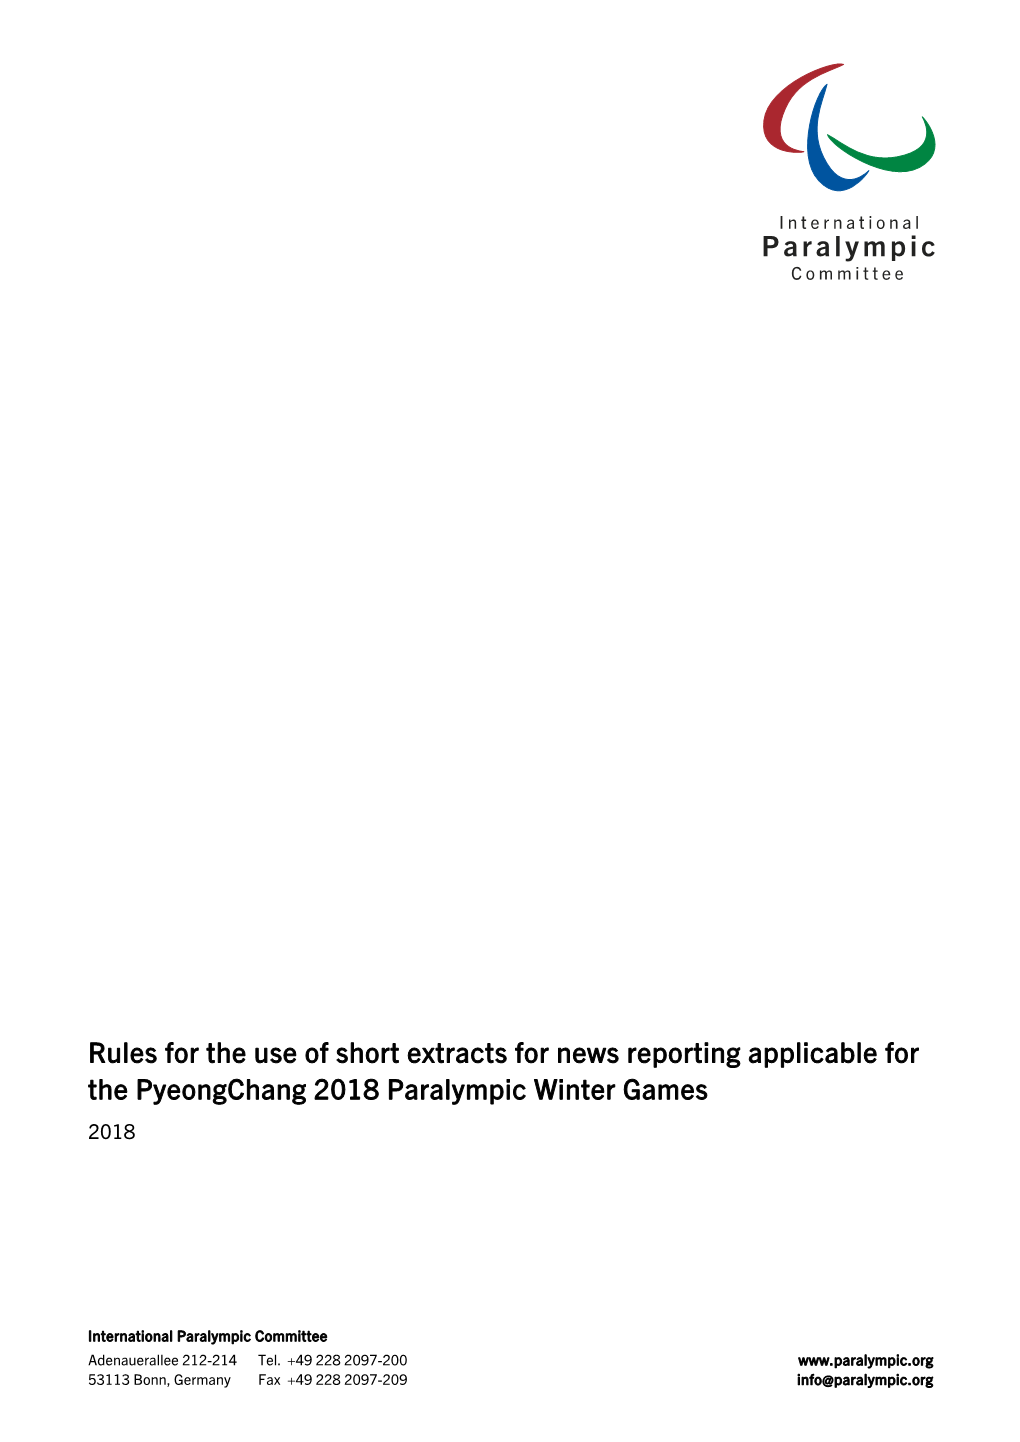 Rules for the Use of Short Extracts for News Reporting Applicable for the Pyeongchang 2018 Paralympic Winter Games 2018